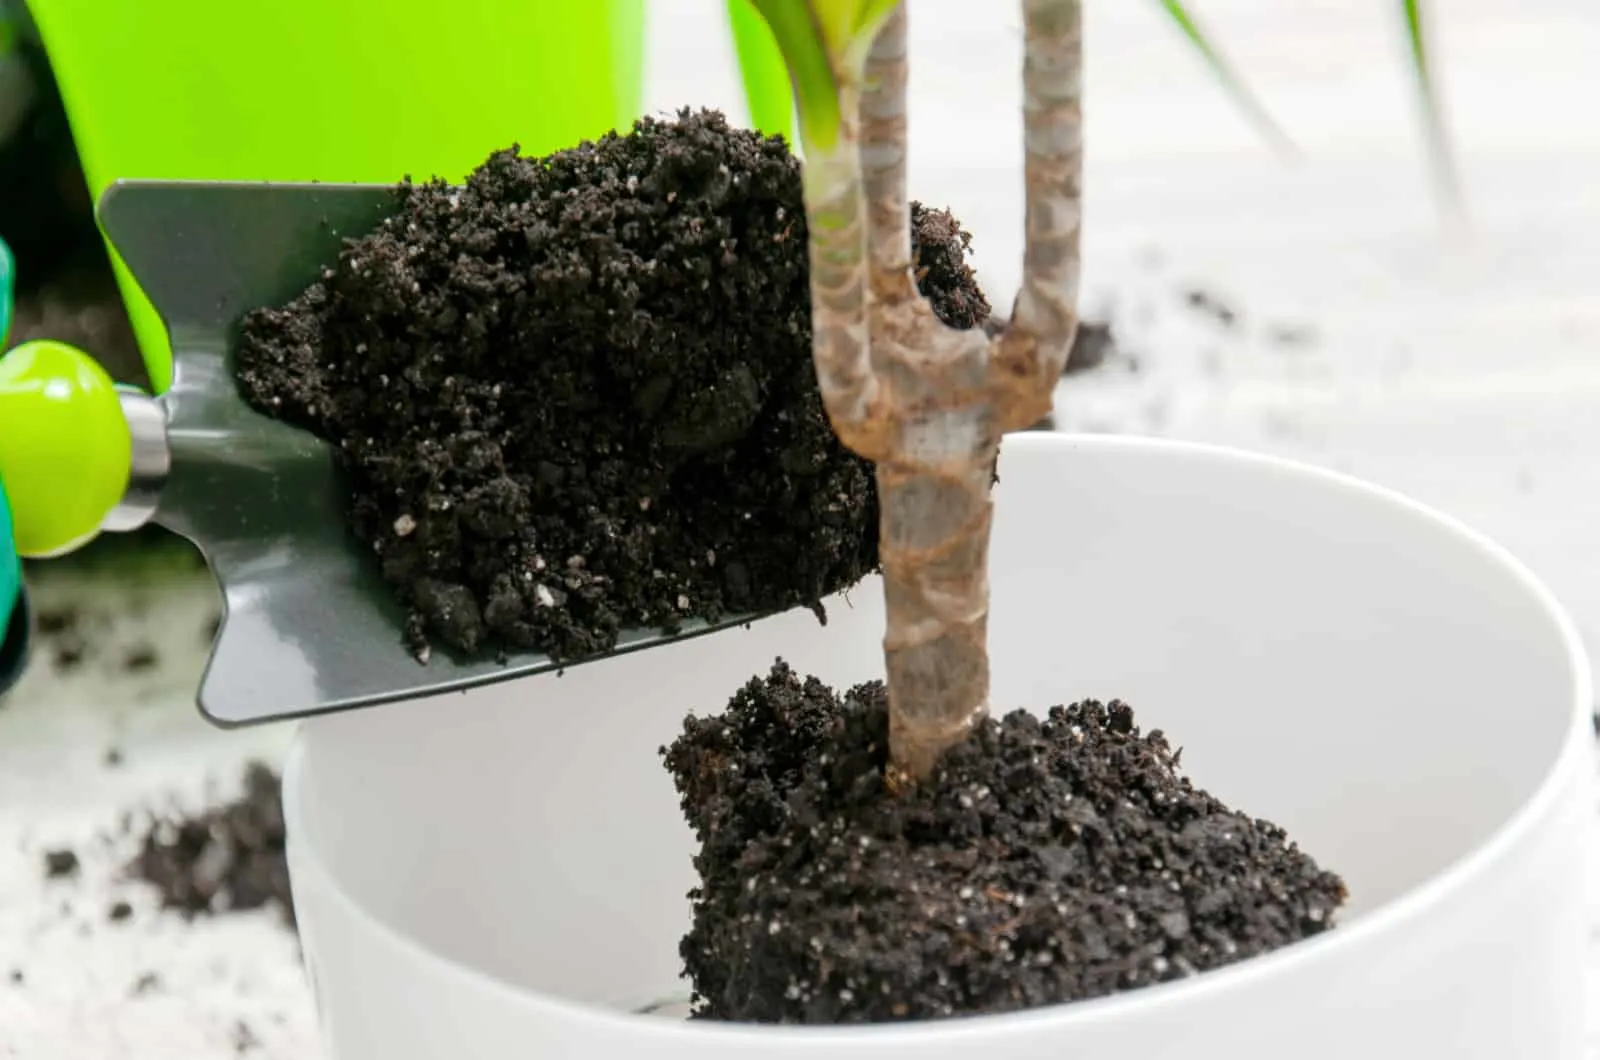 Palm Tree in pot with soil